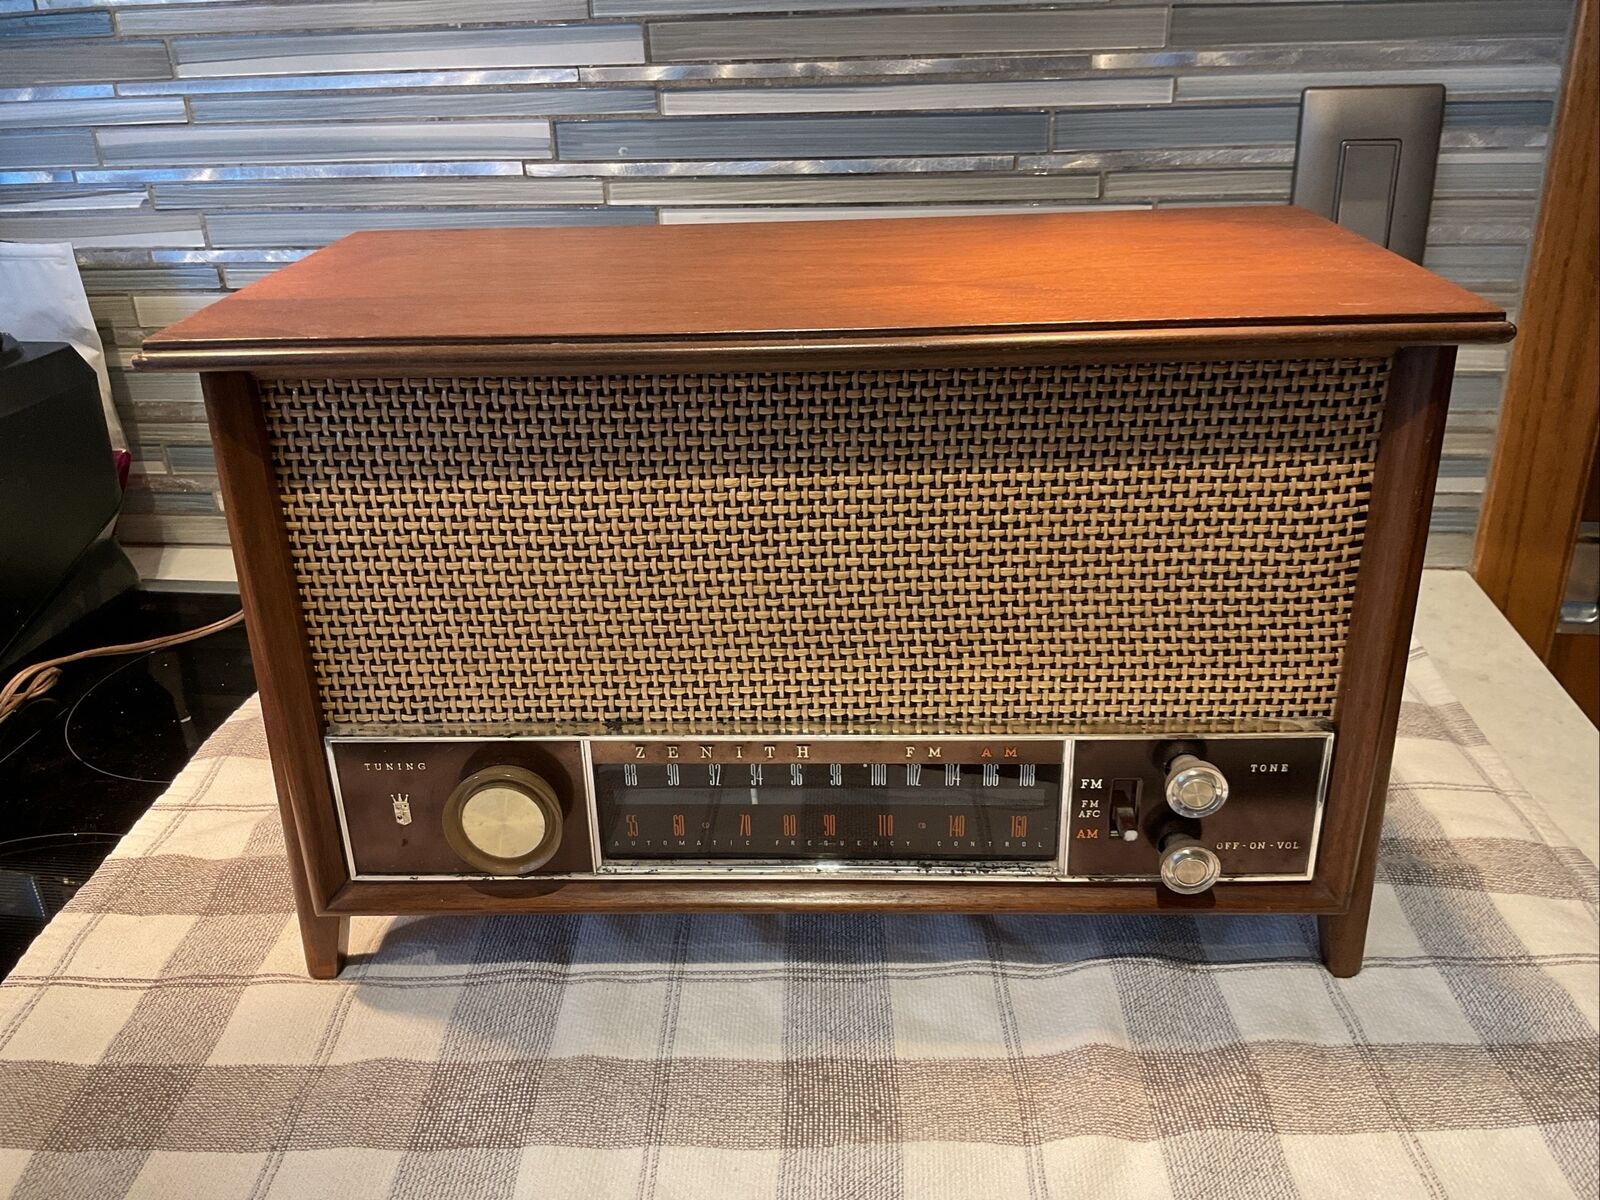 Vintage Zenith S-58040 Long Distance AM/FM Tube Radio in Wooden Cabinet